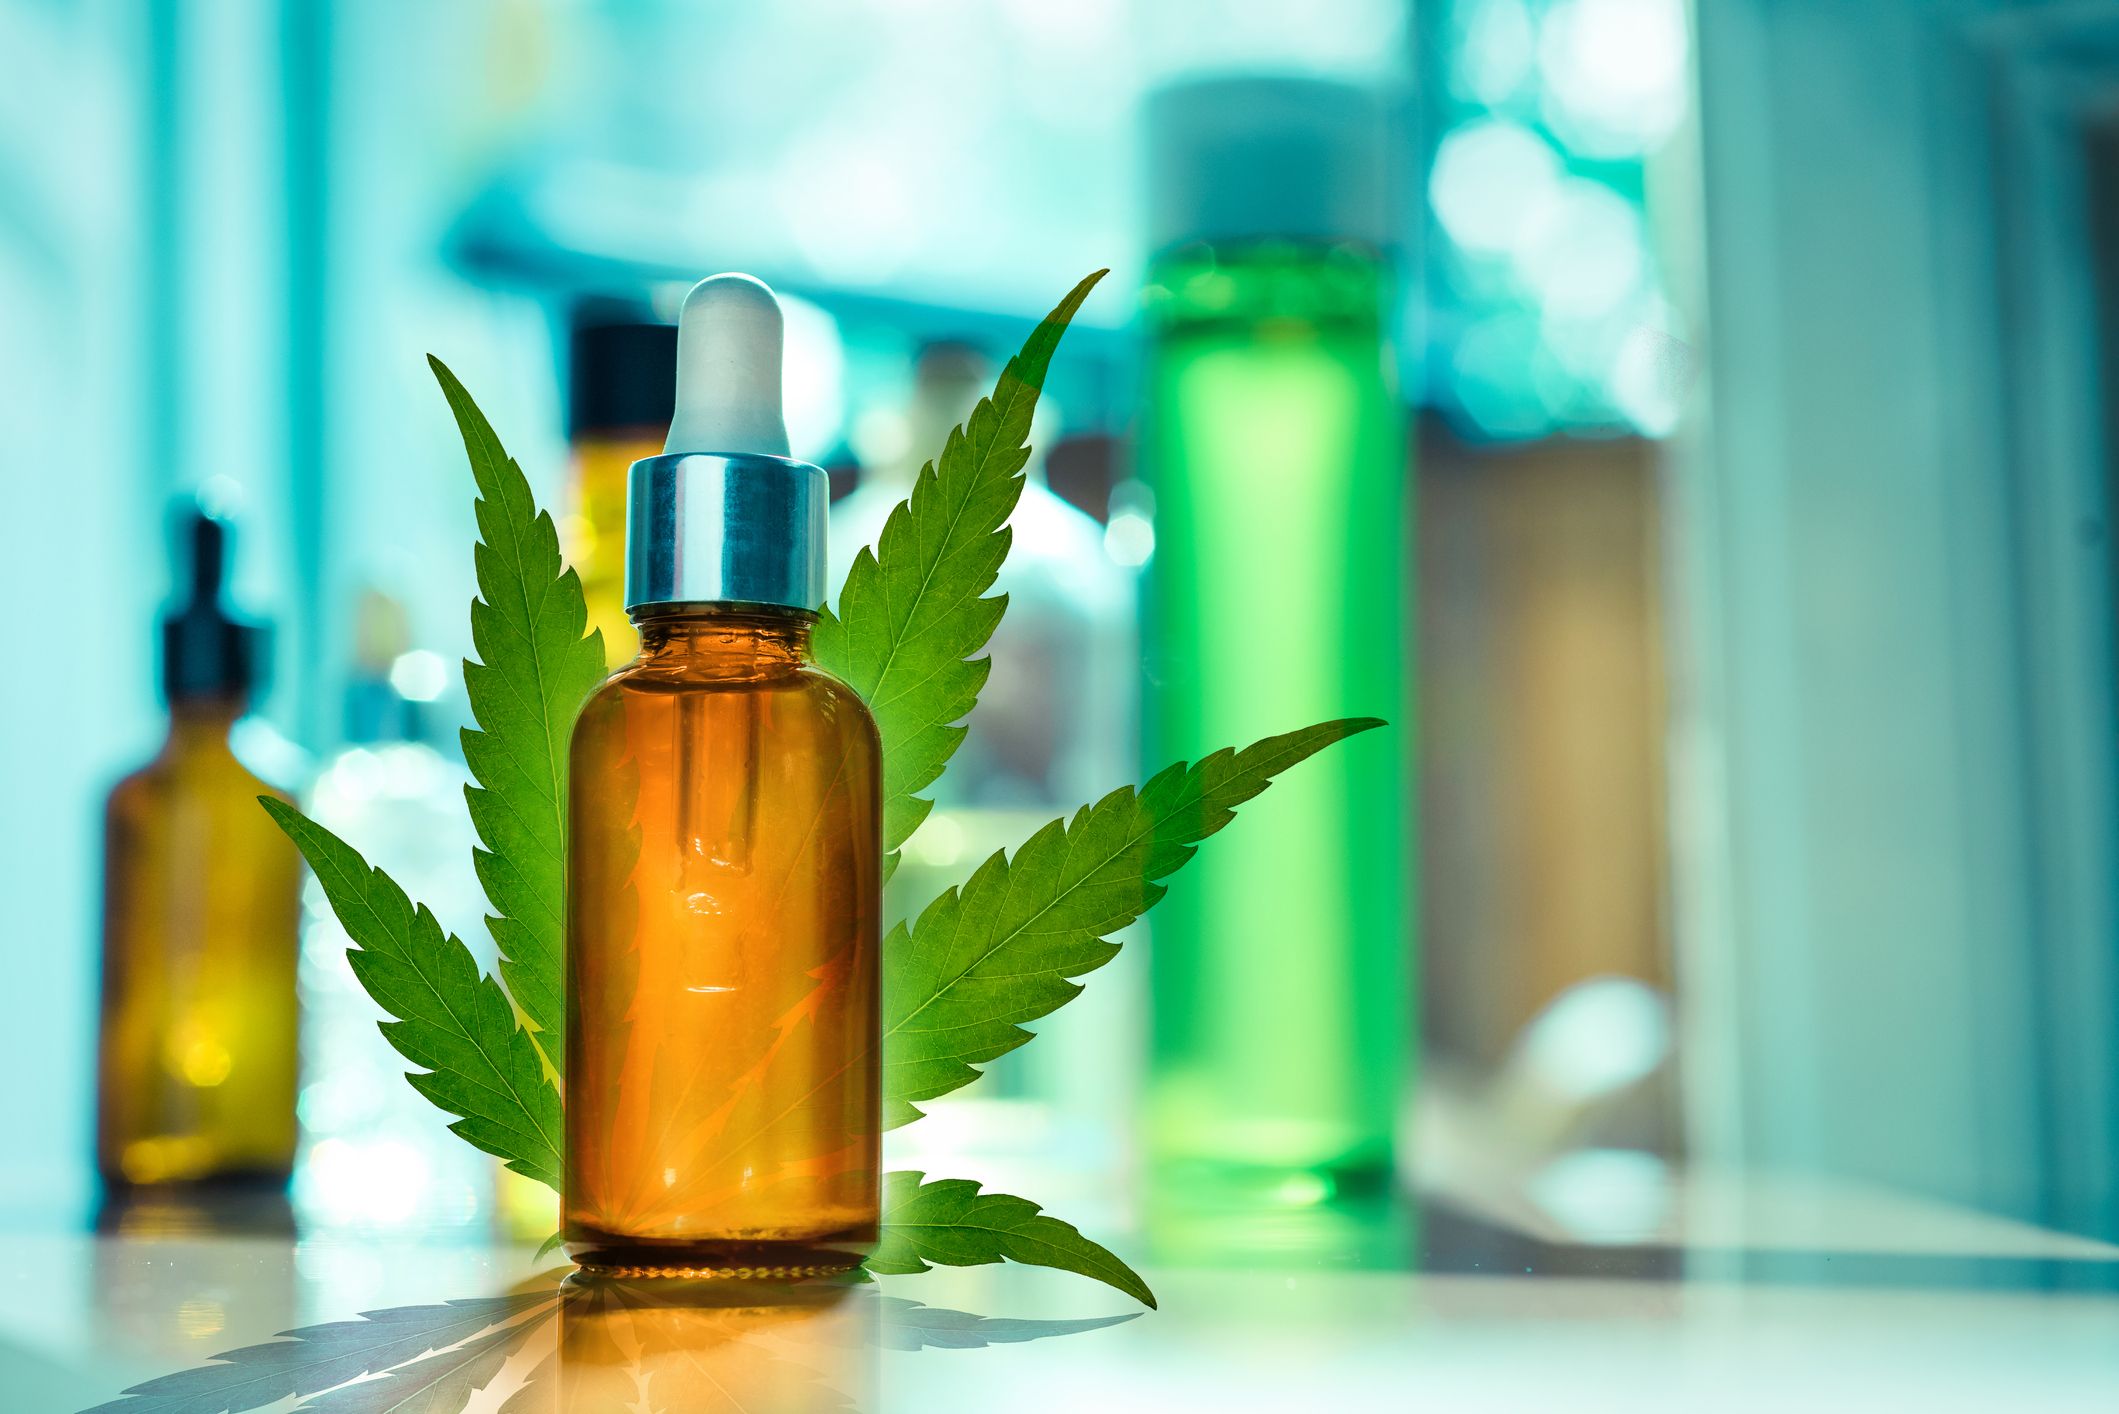 Looking to purchase Cannabis oil in Canada? Brush up on CBD beforehand